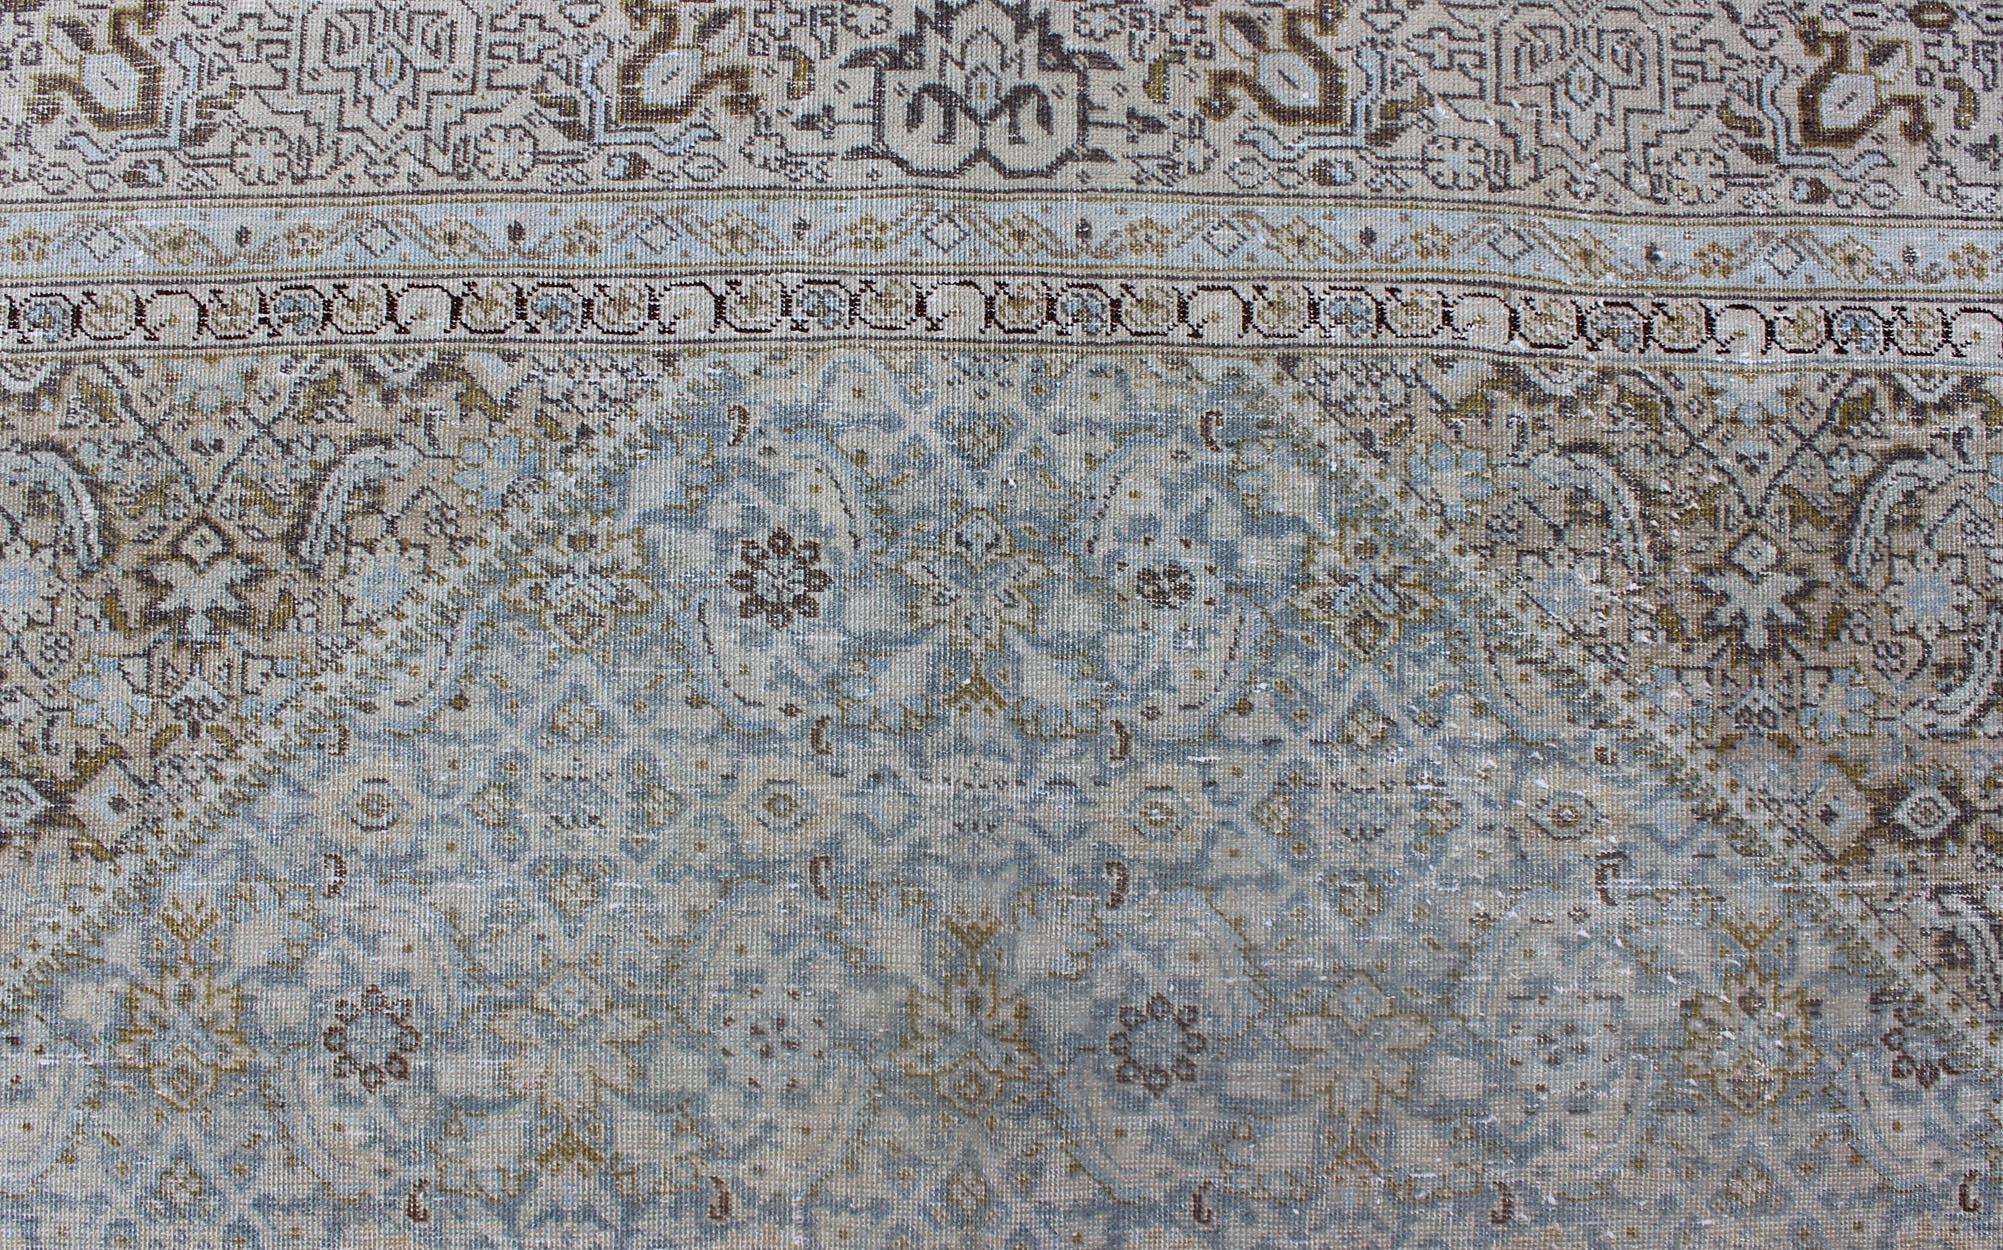 Antique Persian Tabriz Rug with Medallion in Light Blue, Tan and Brown Colors 3